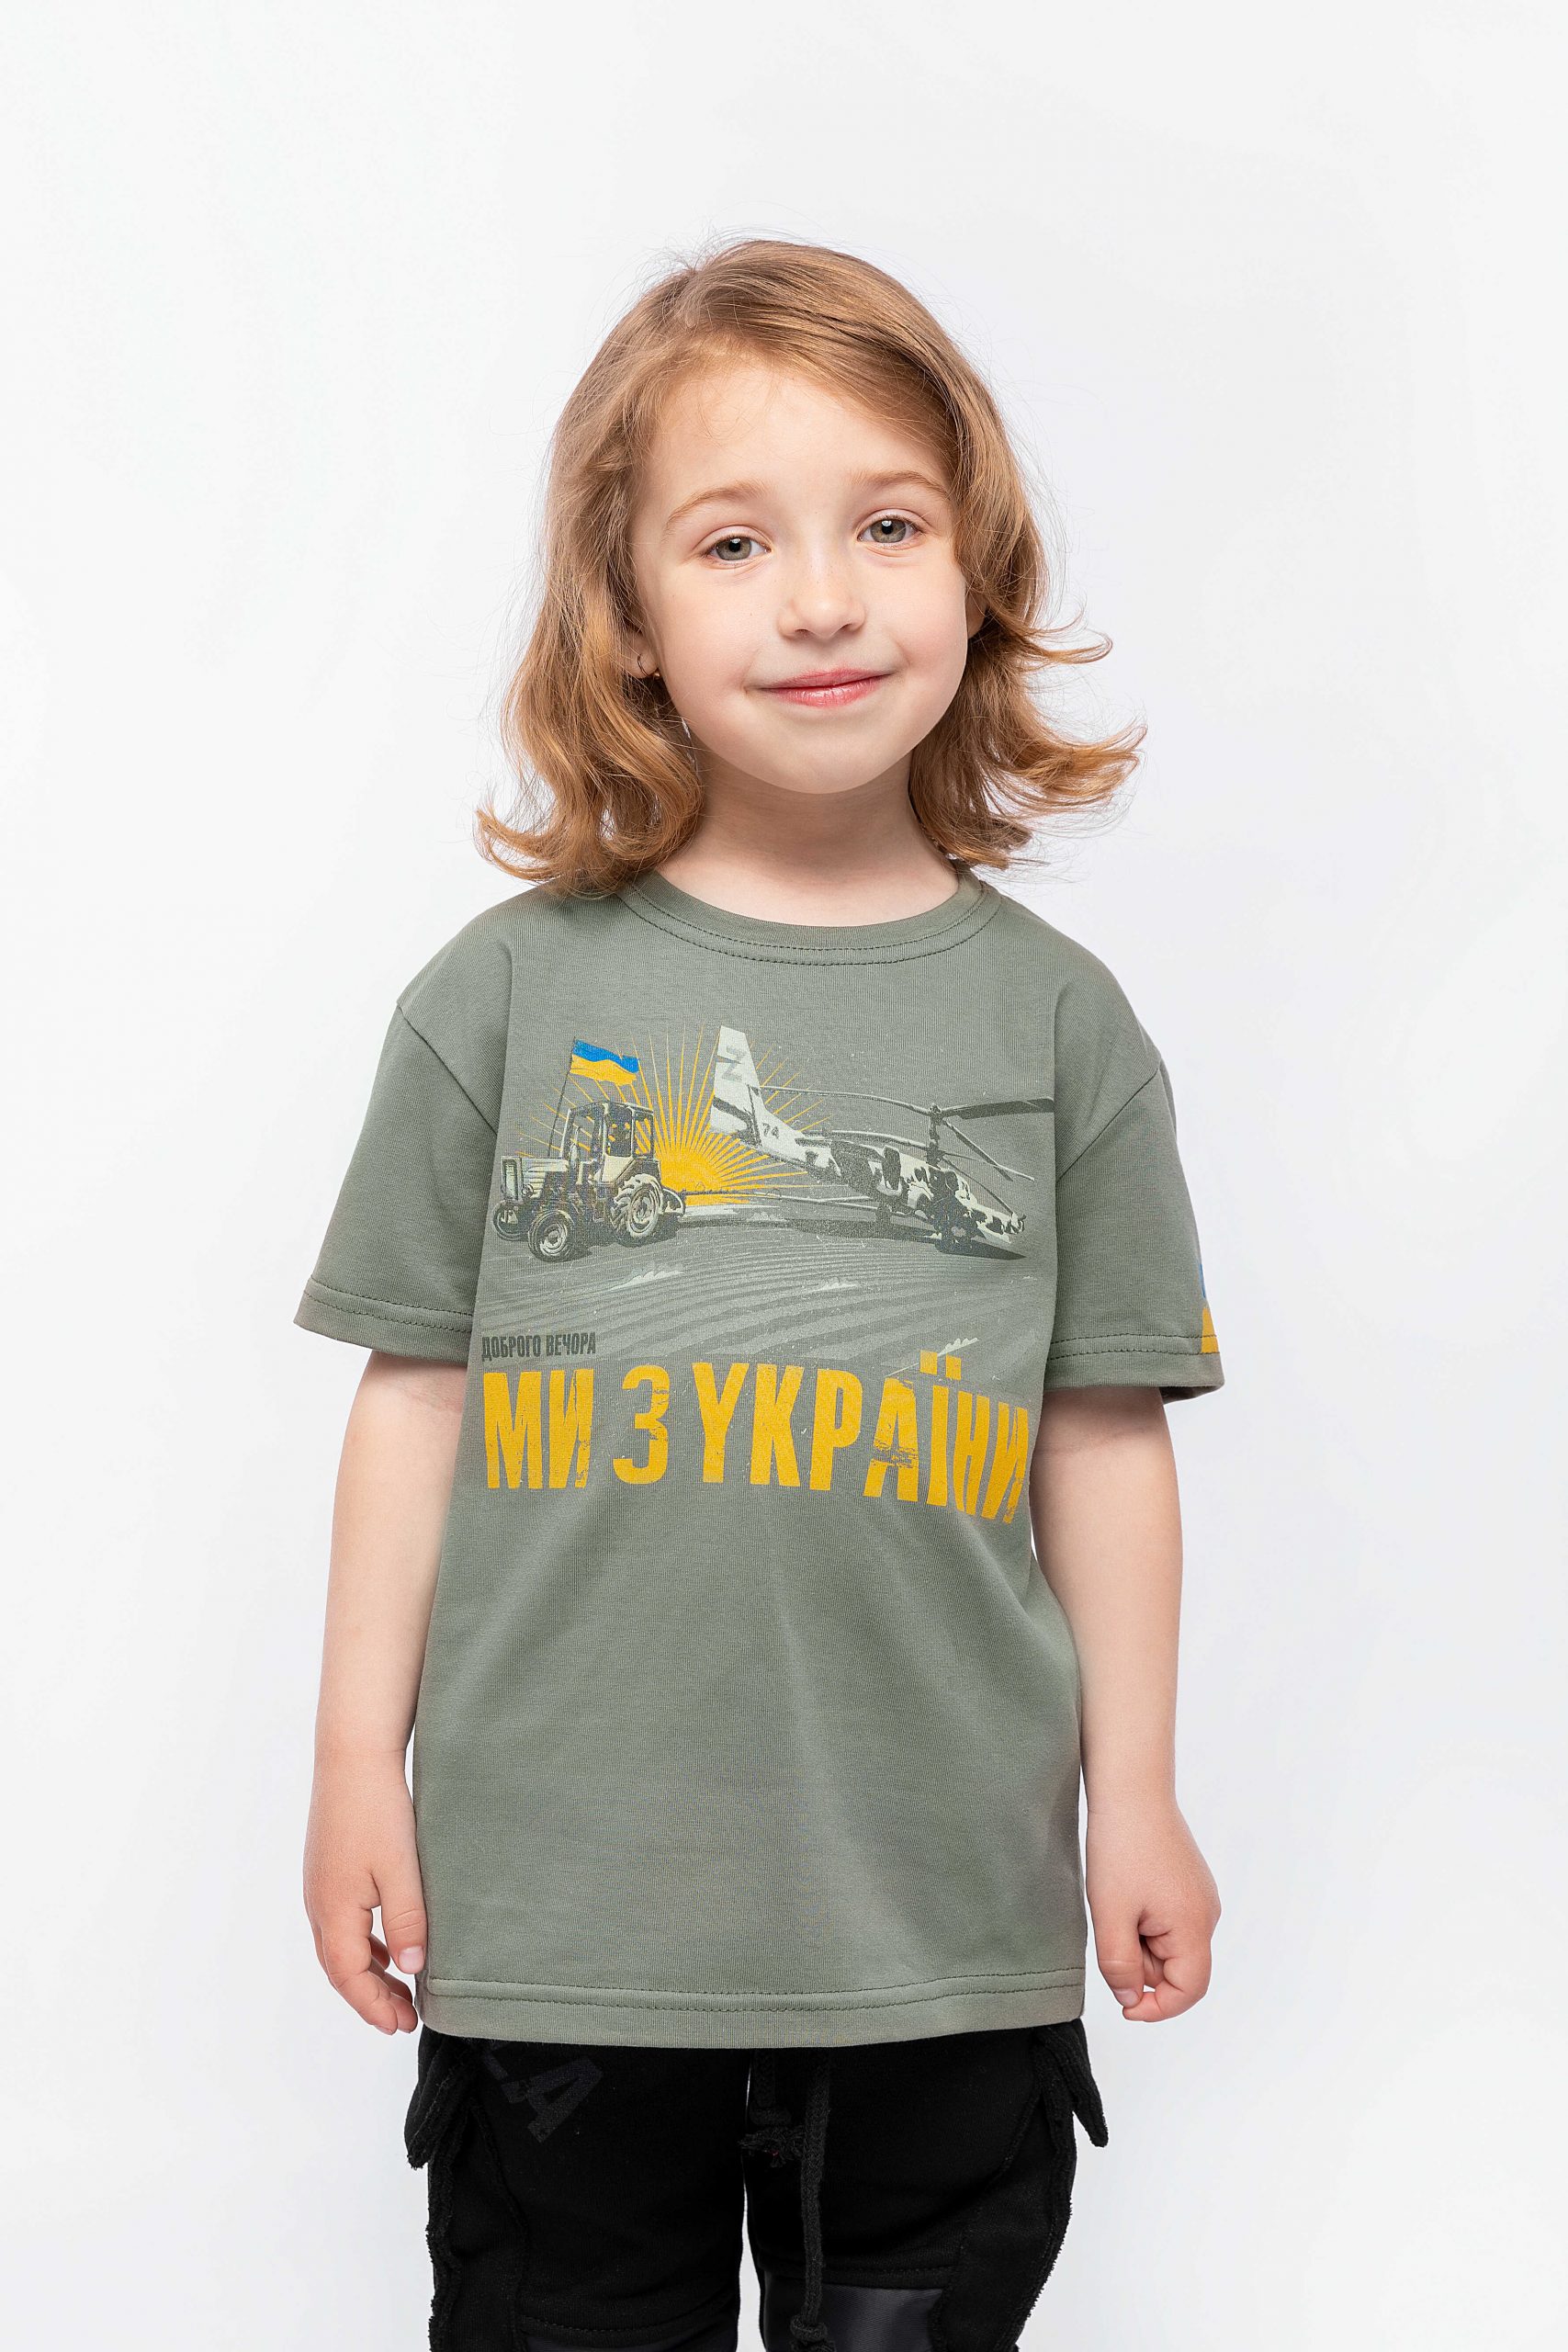 Kids T-Shirt We Are From Ukraine.h. Color khaki. .